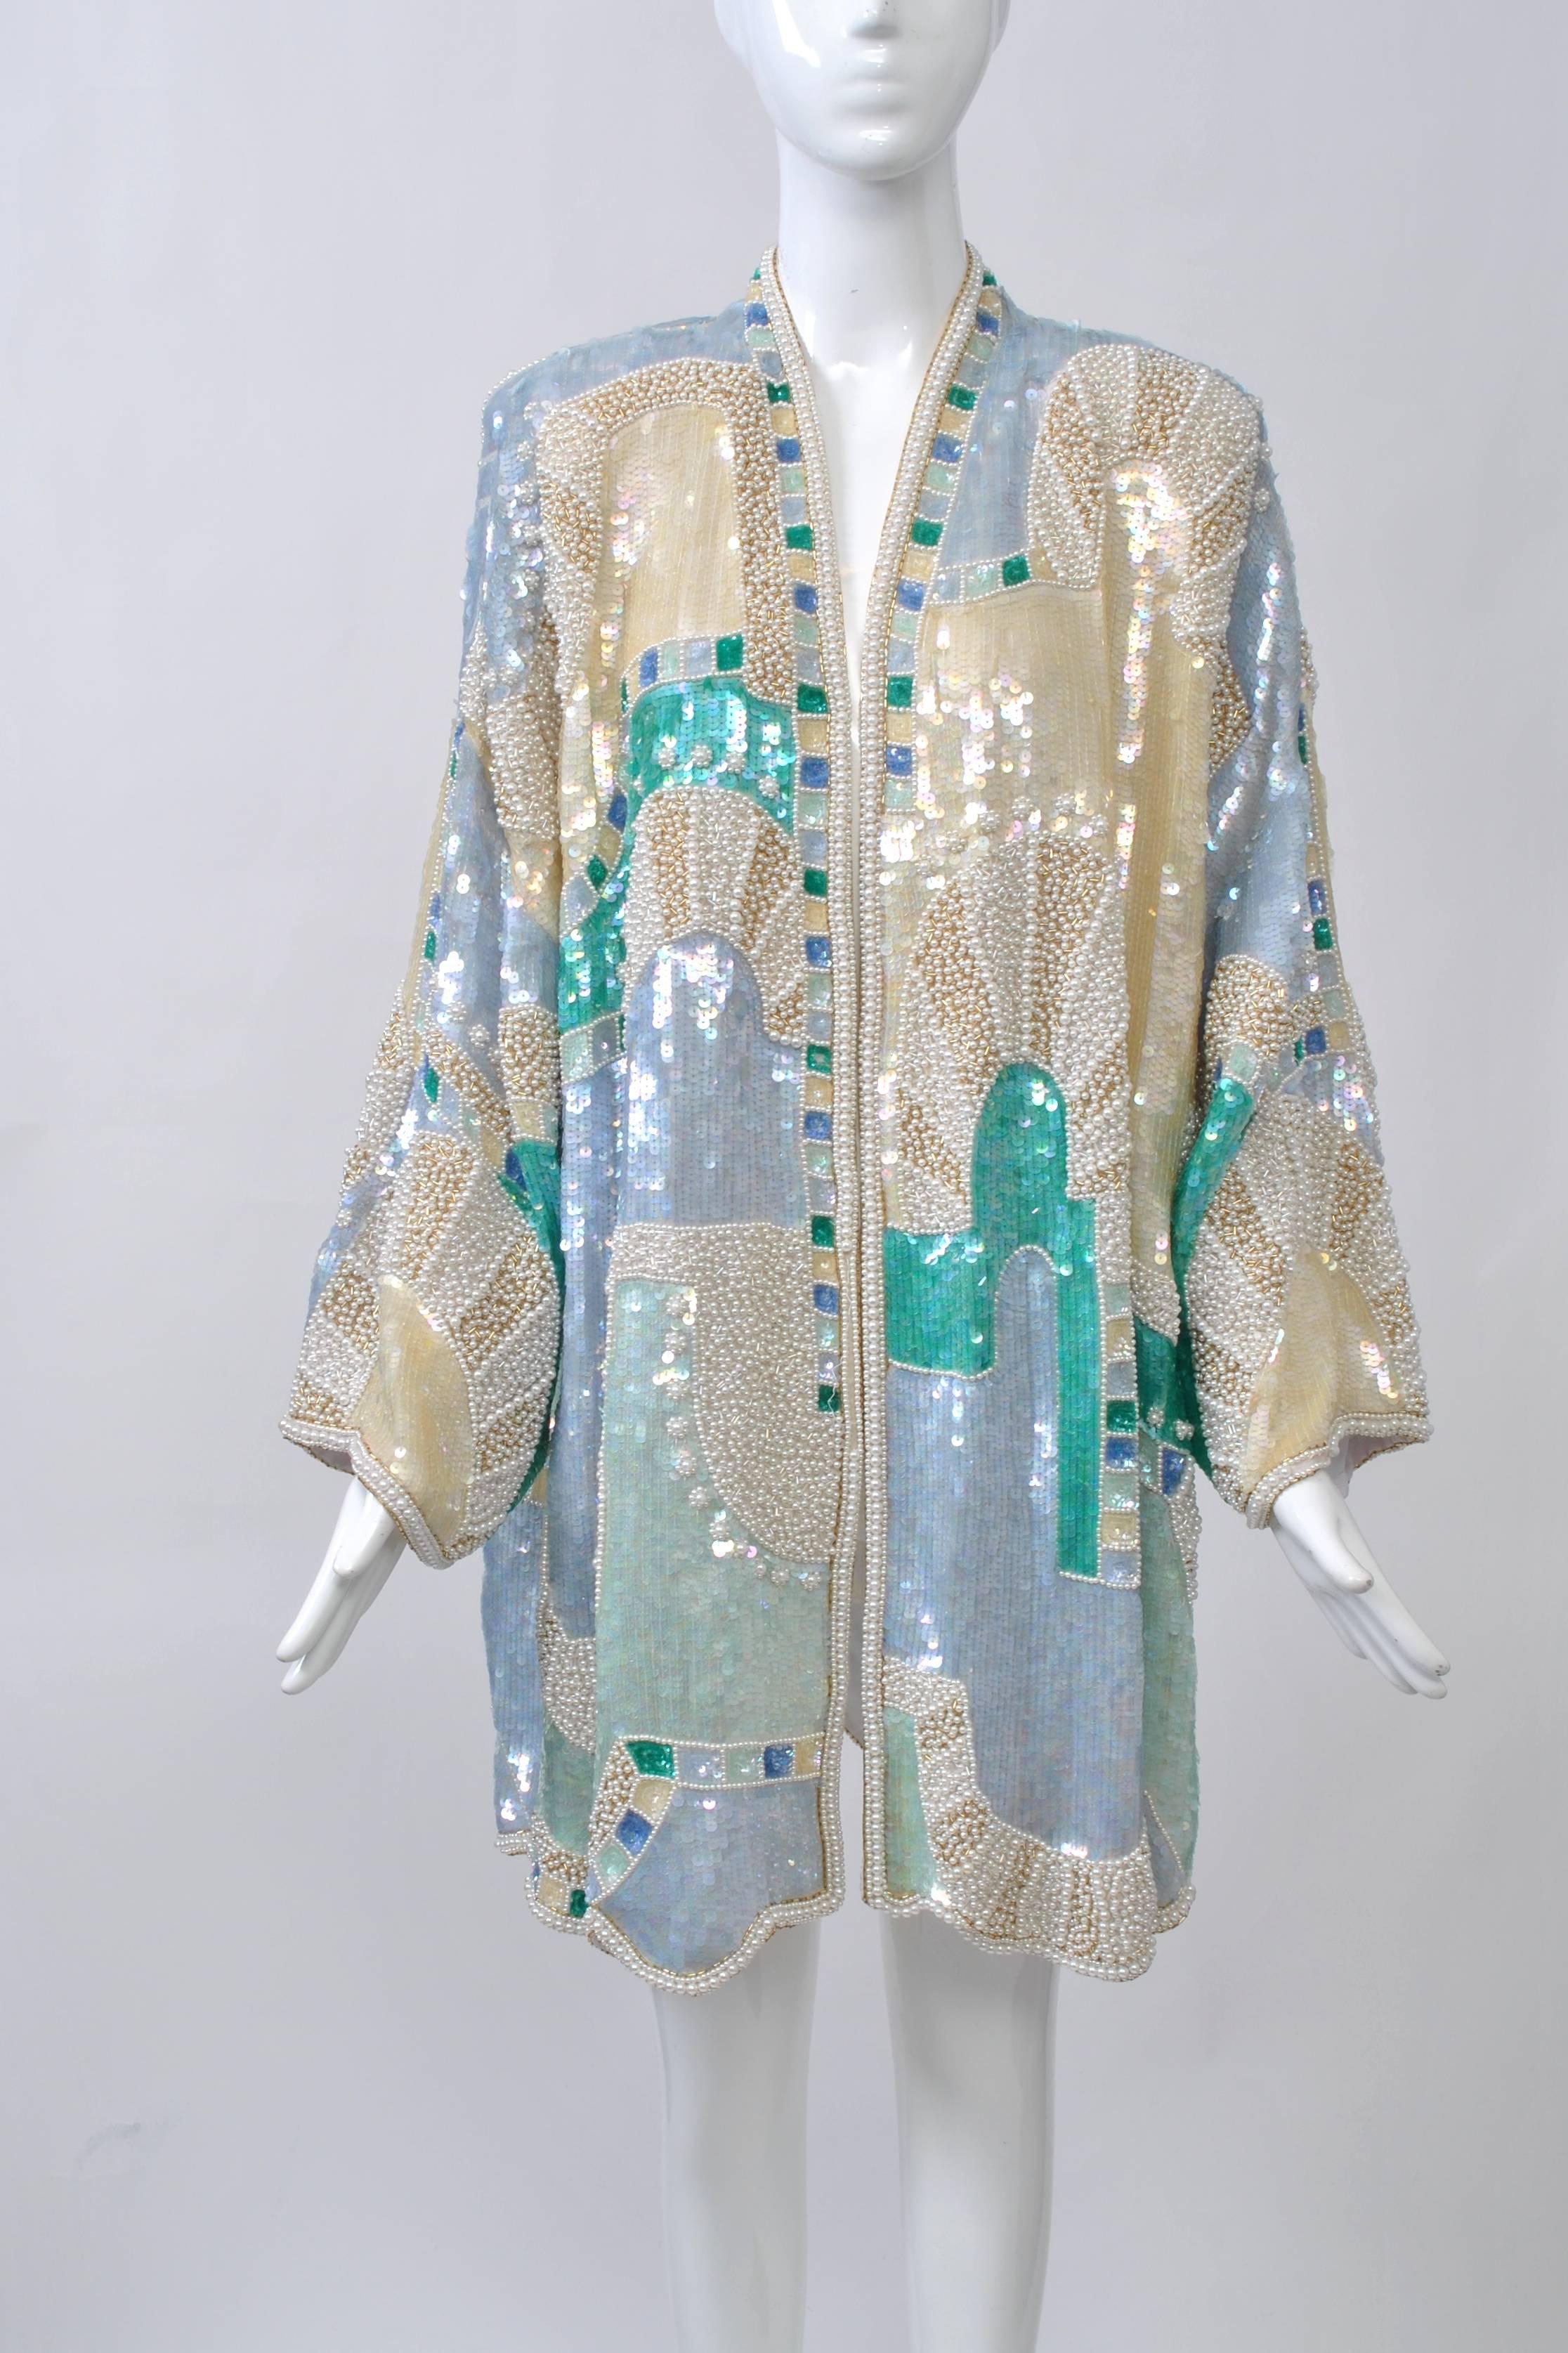 Extravagantly beaded and sequined 1980s 3/4 length coat in blue, ivory, and turquoise hues arranged in an abstract geometric configuration. Open front, wide sleeves, shoulder pads. Retailed by Lillie Rubin, a high-end boutique on New York's 57th St.